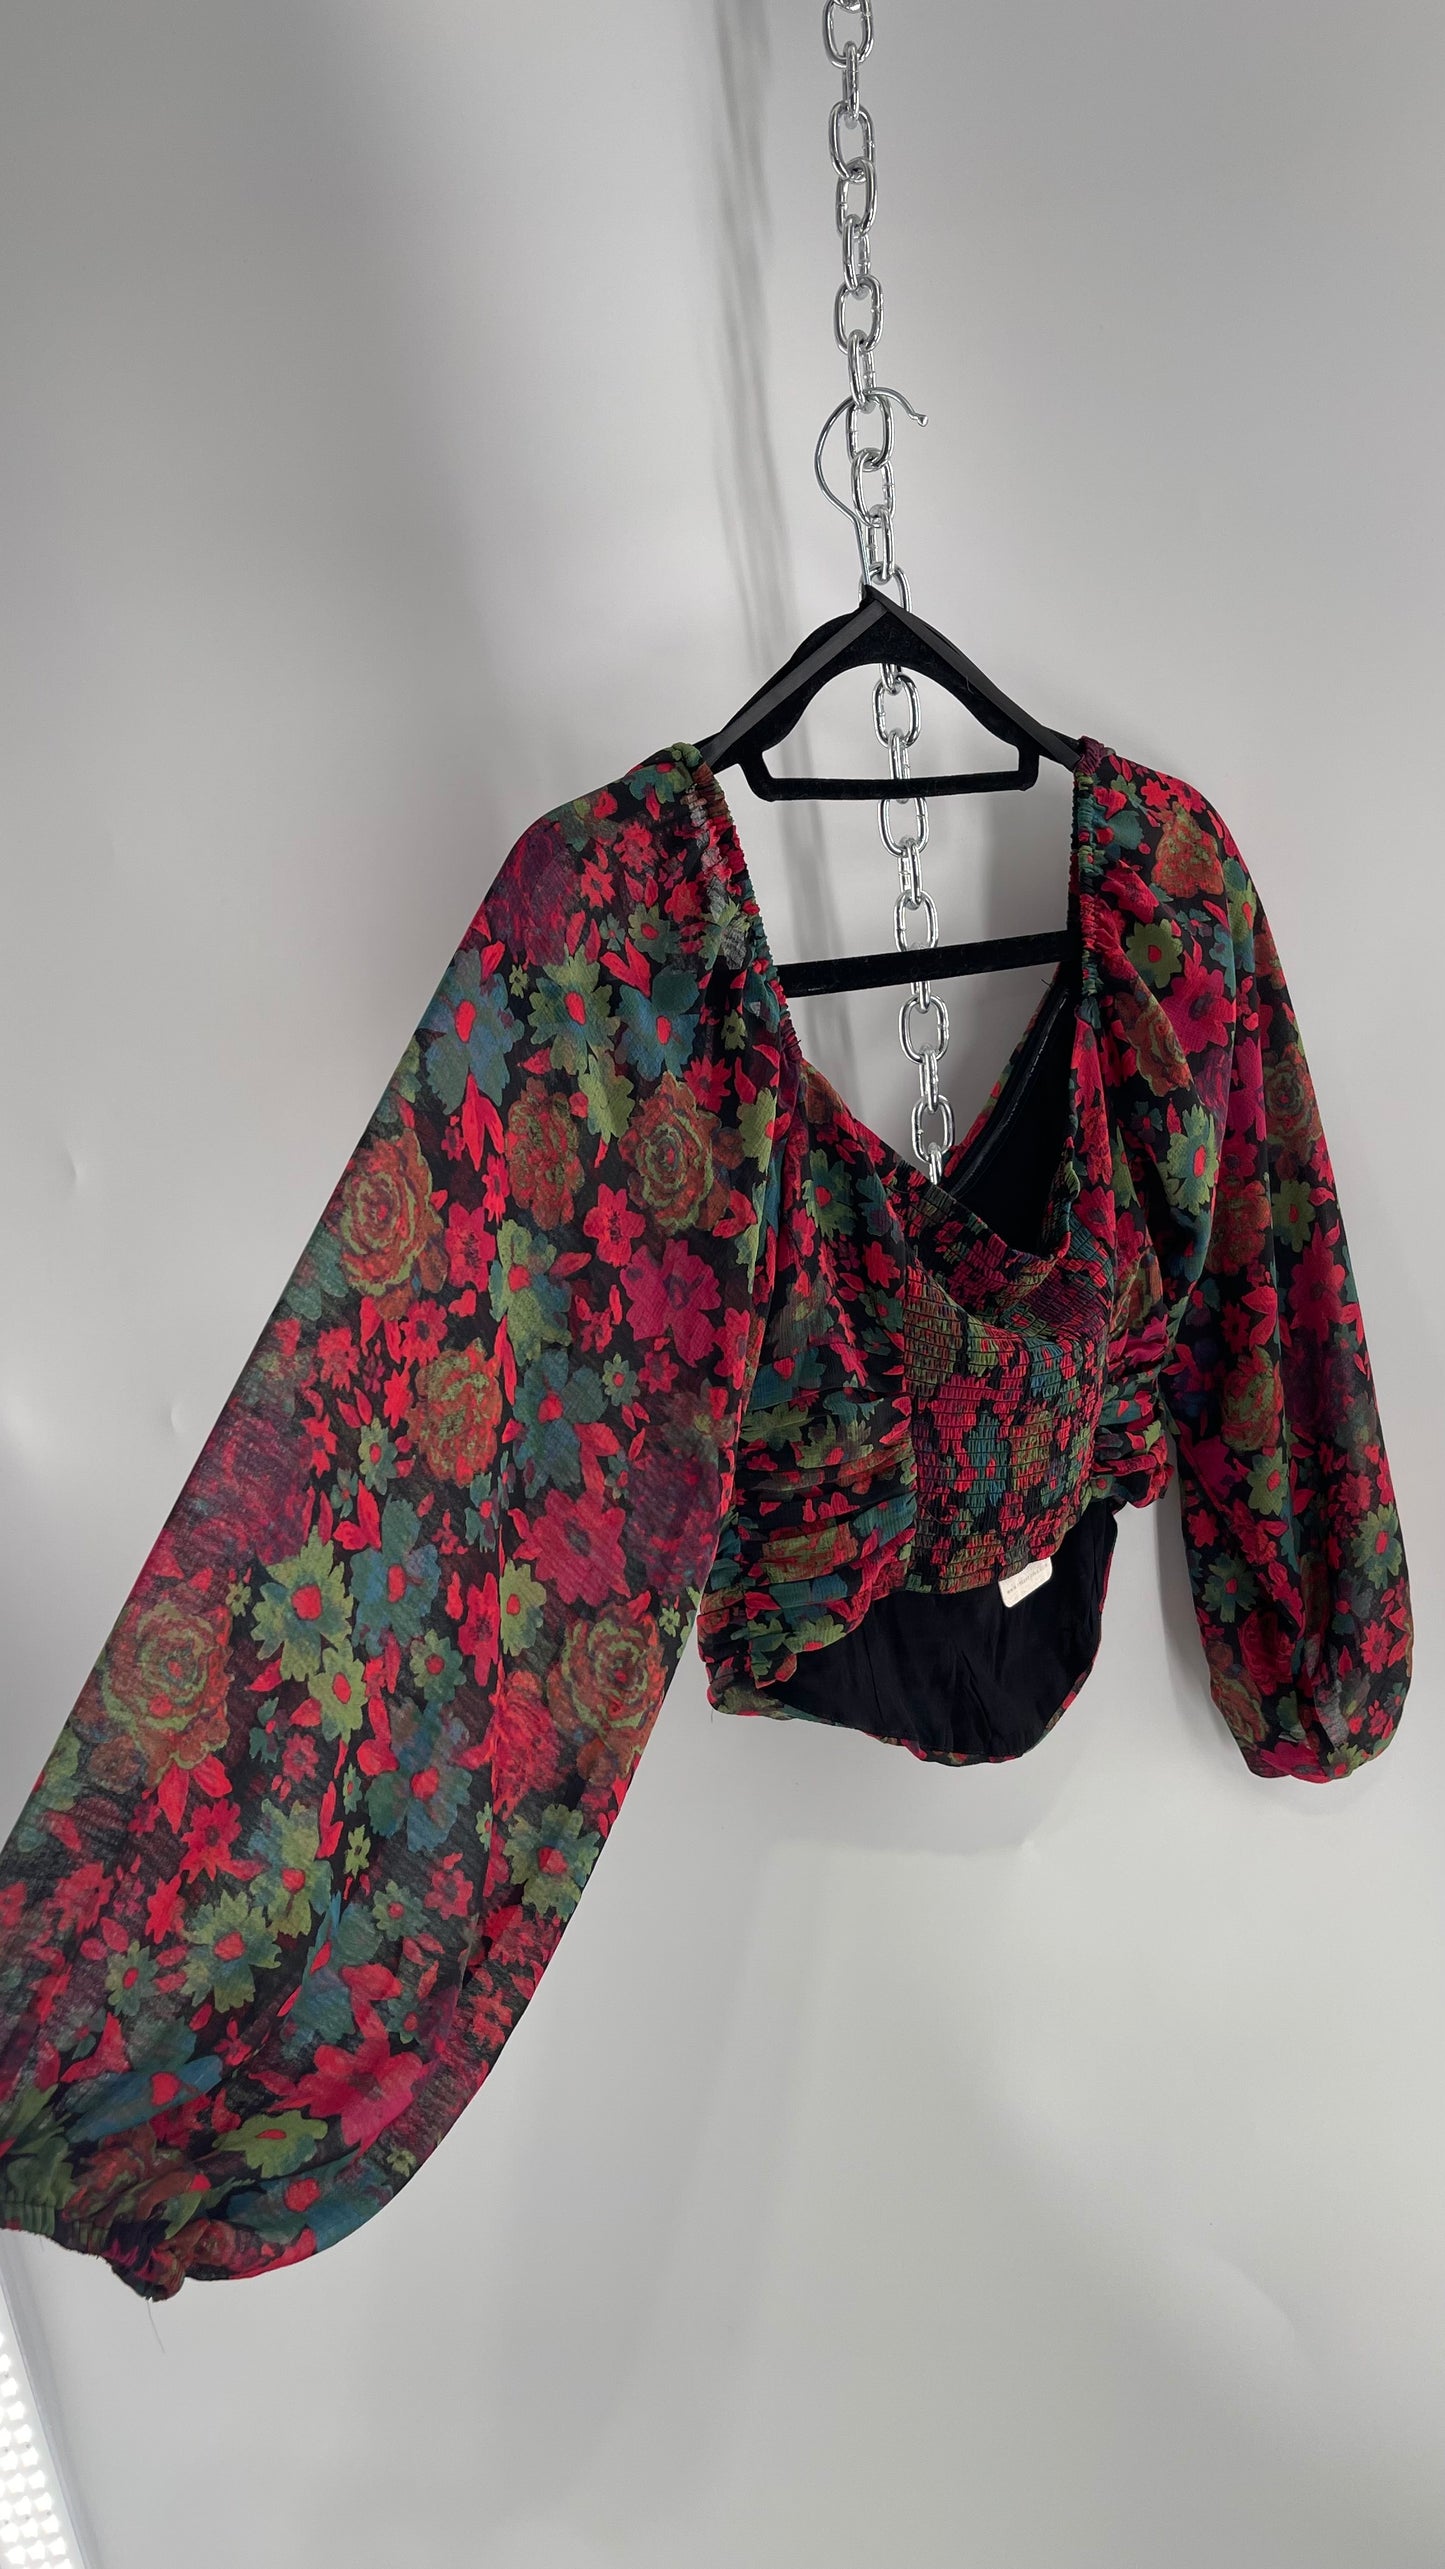 Free People Cropped Floral Blouse with Ruched Body, Balloon Sleeves and Appliqué Rosette Bustline with Tags Attached (Small)